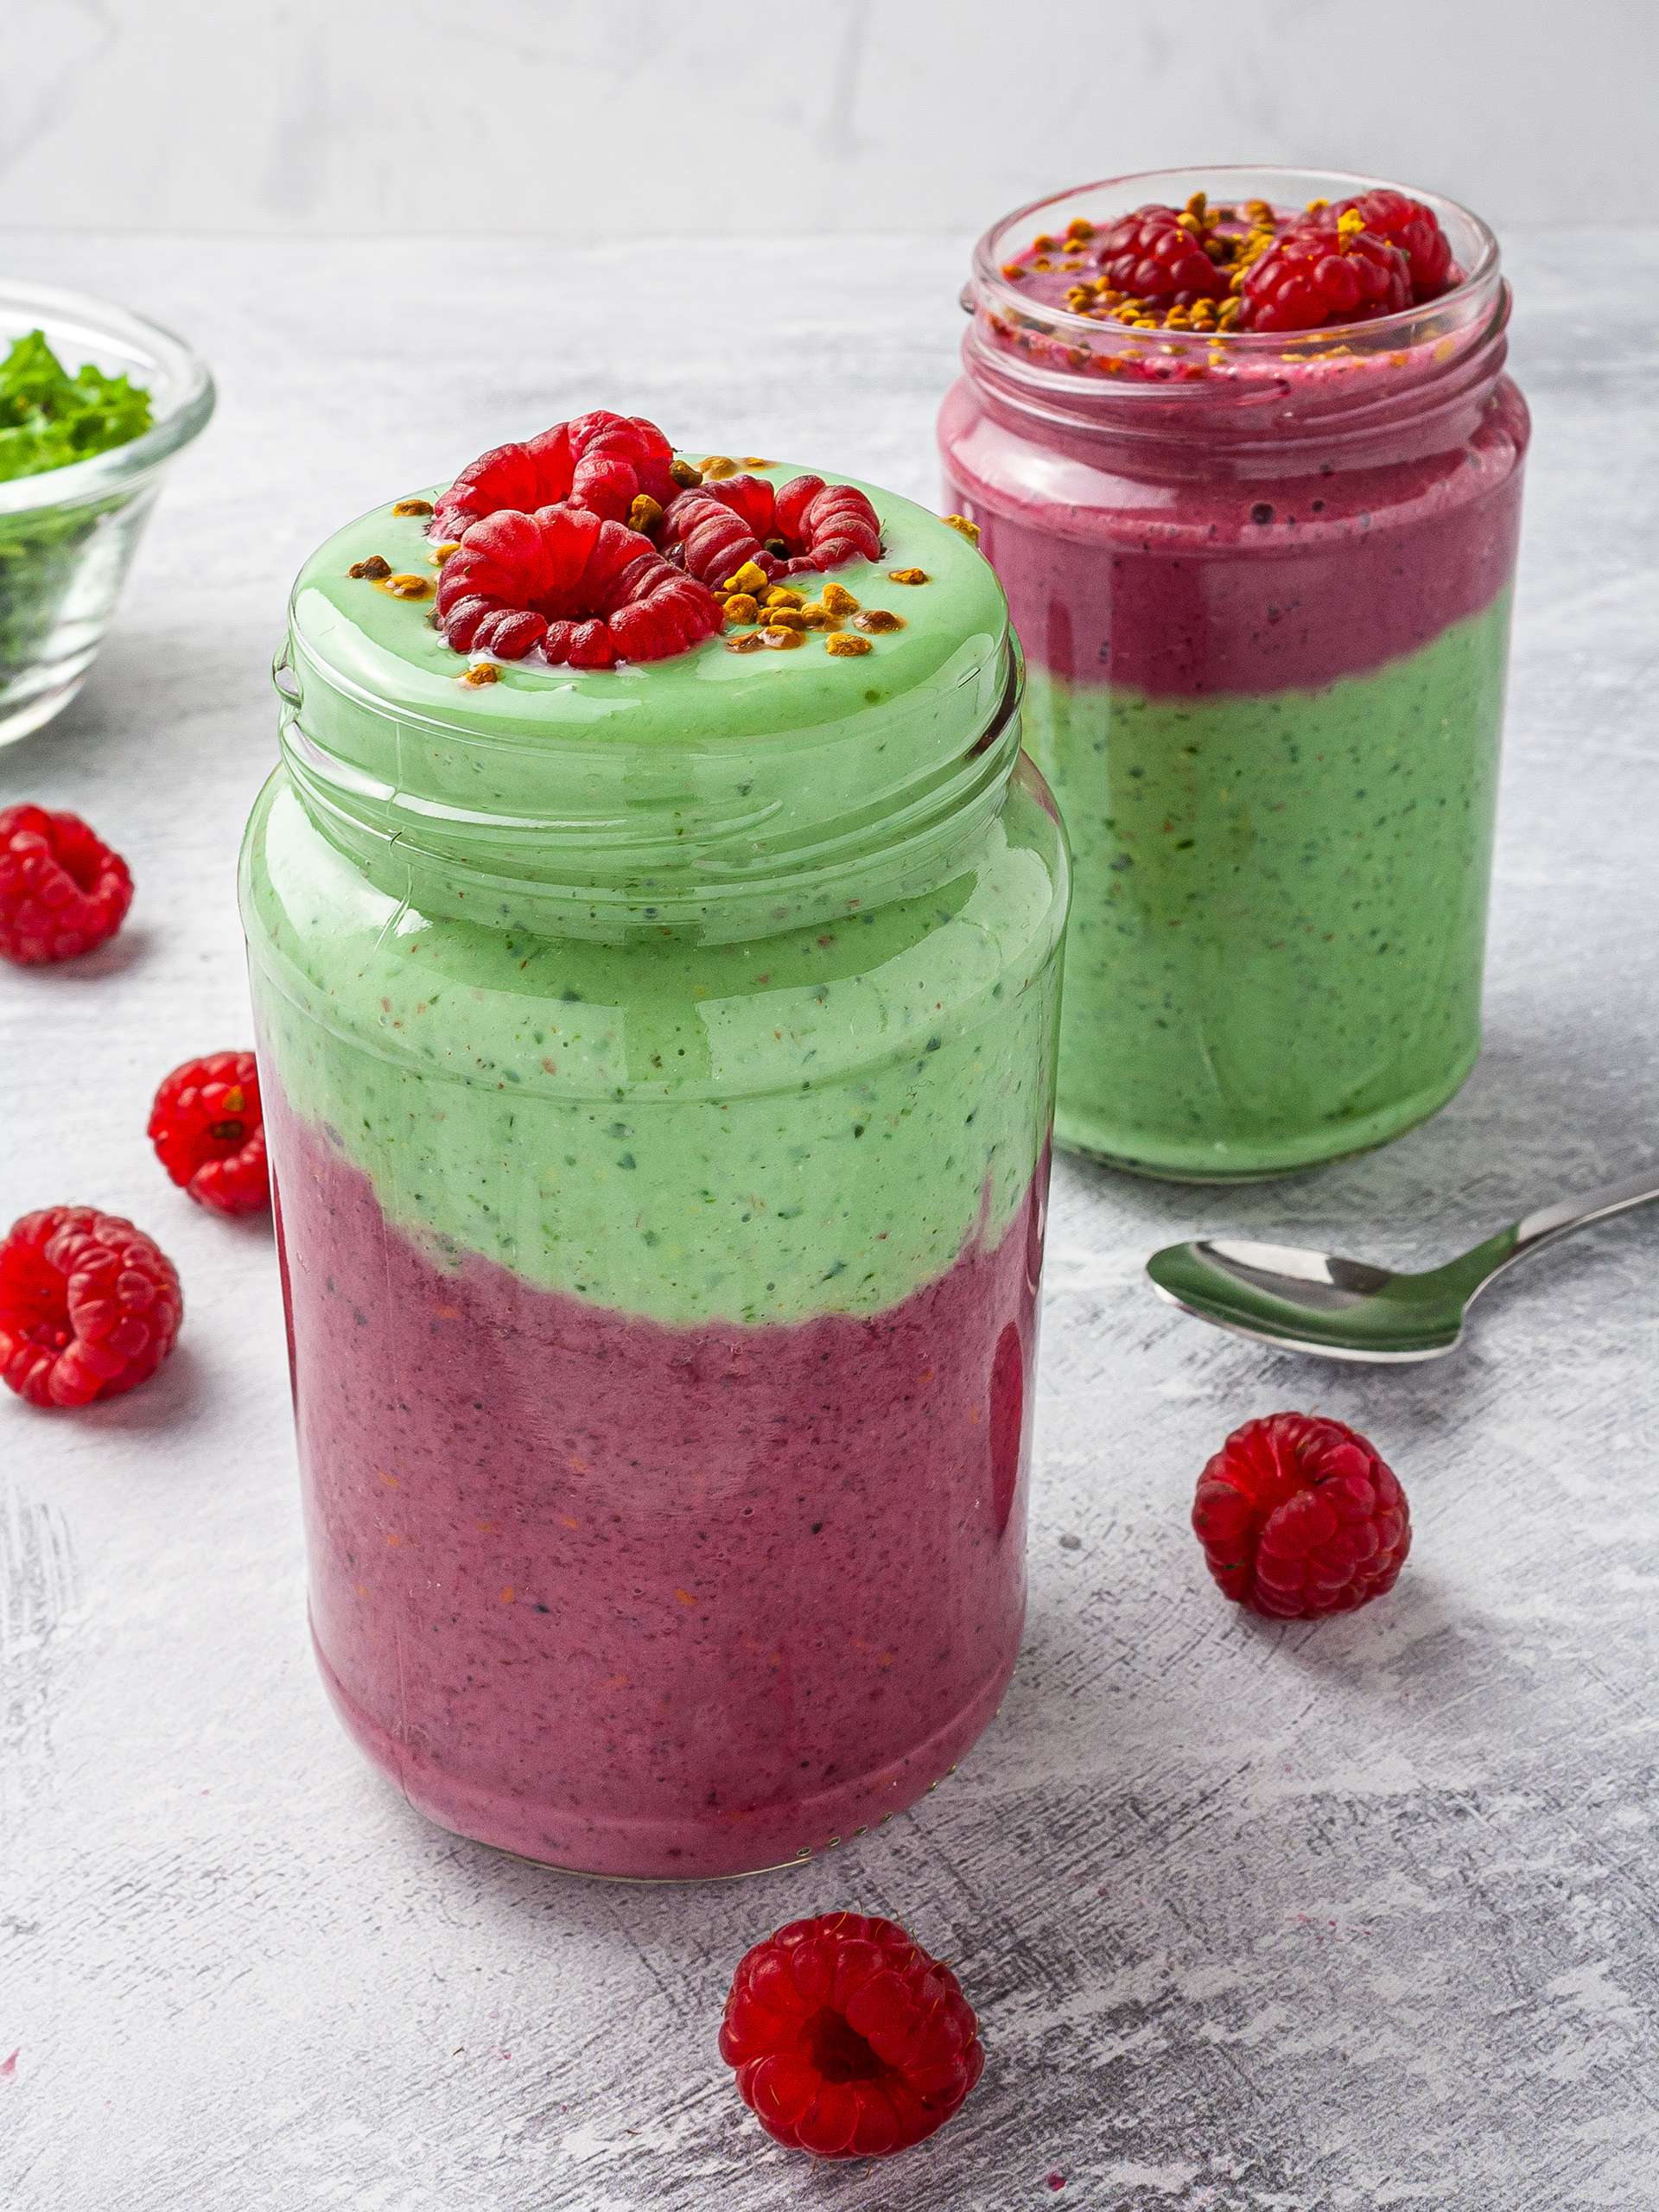 Weight Loss Raspberry Kale Smoothie Recipe